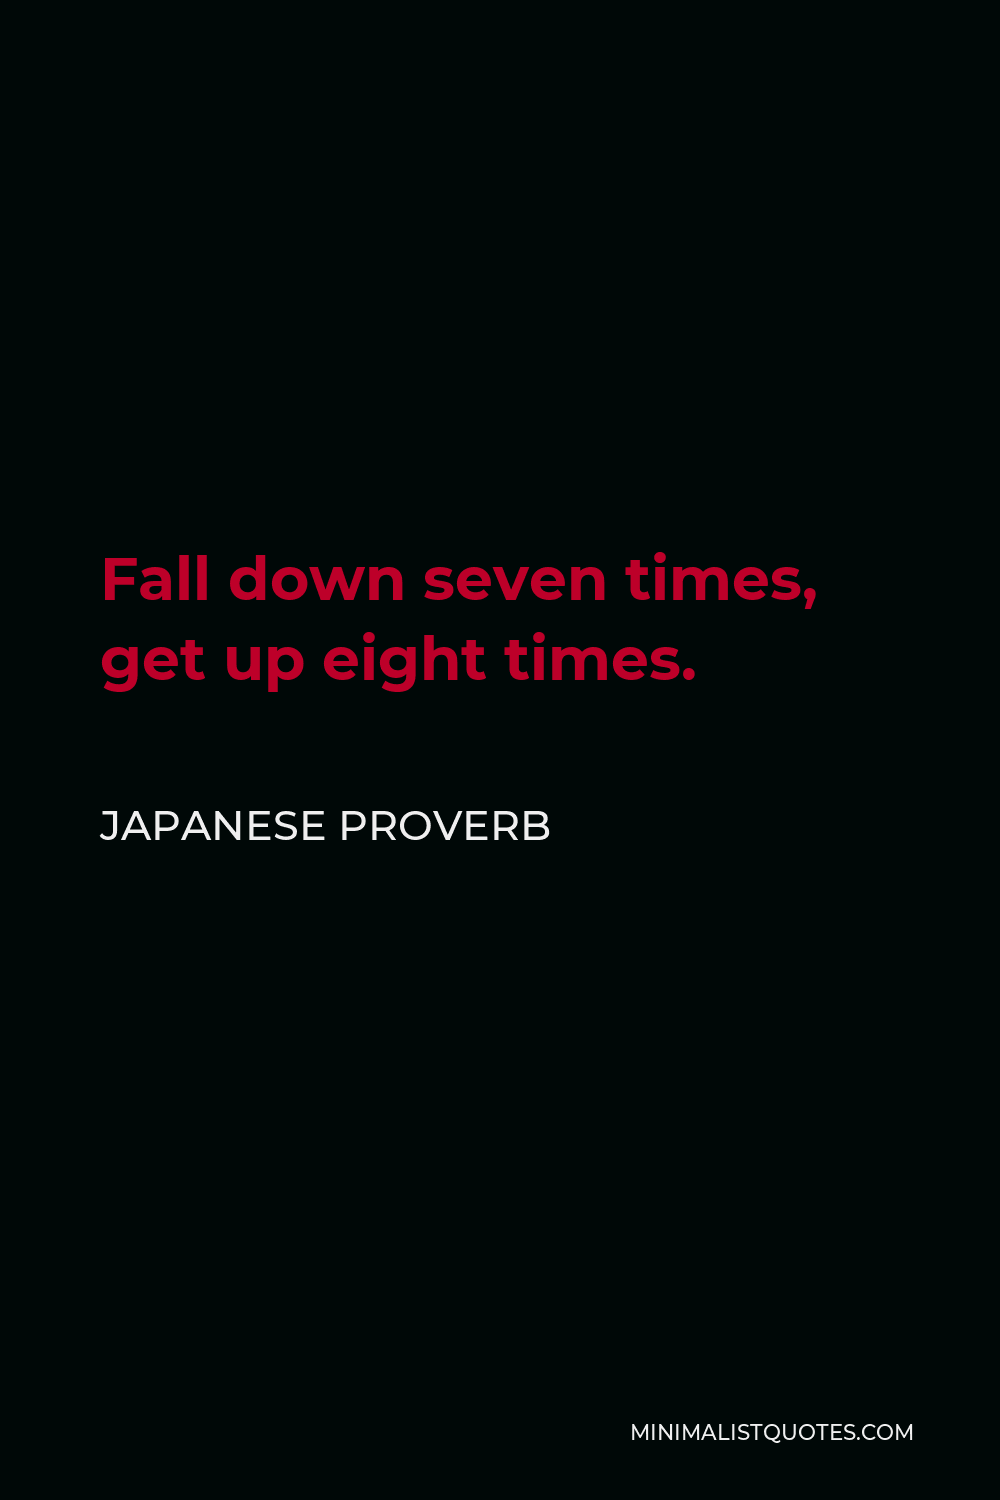 Japanese Proverb Quote - Fall down seven times, get up eight times.